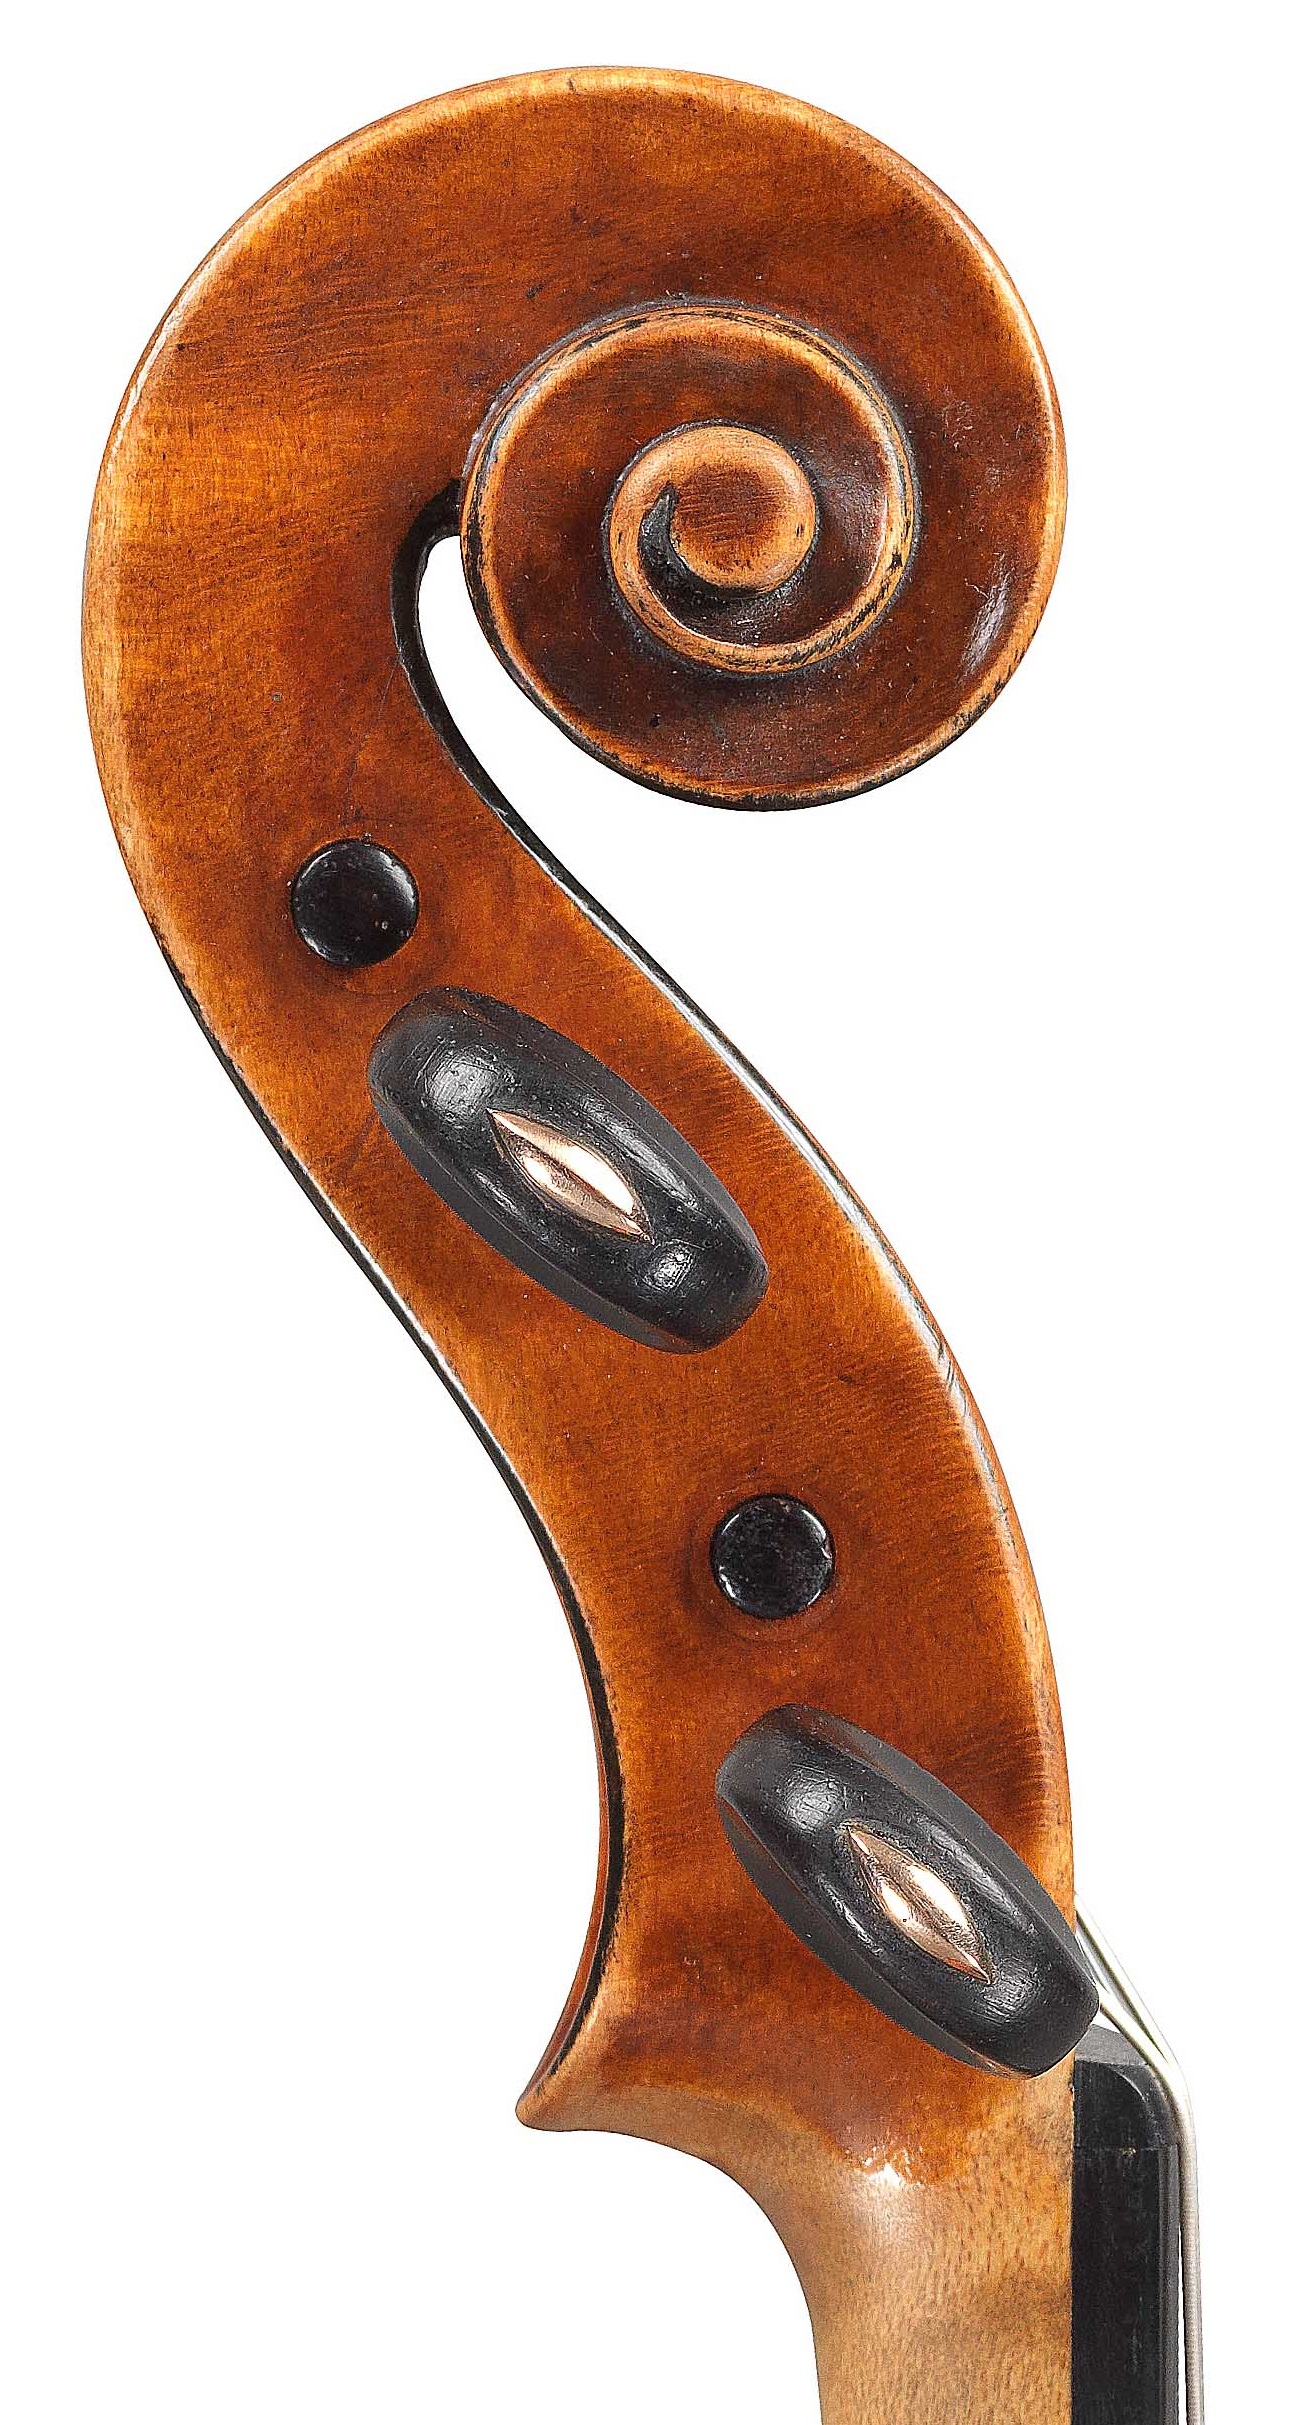 Scroll of violin by JB Vuillaume, ex-Posner, dated 1871, exhibited by Ingles & Hayday at Sotheby's in 2012